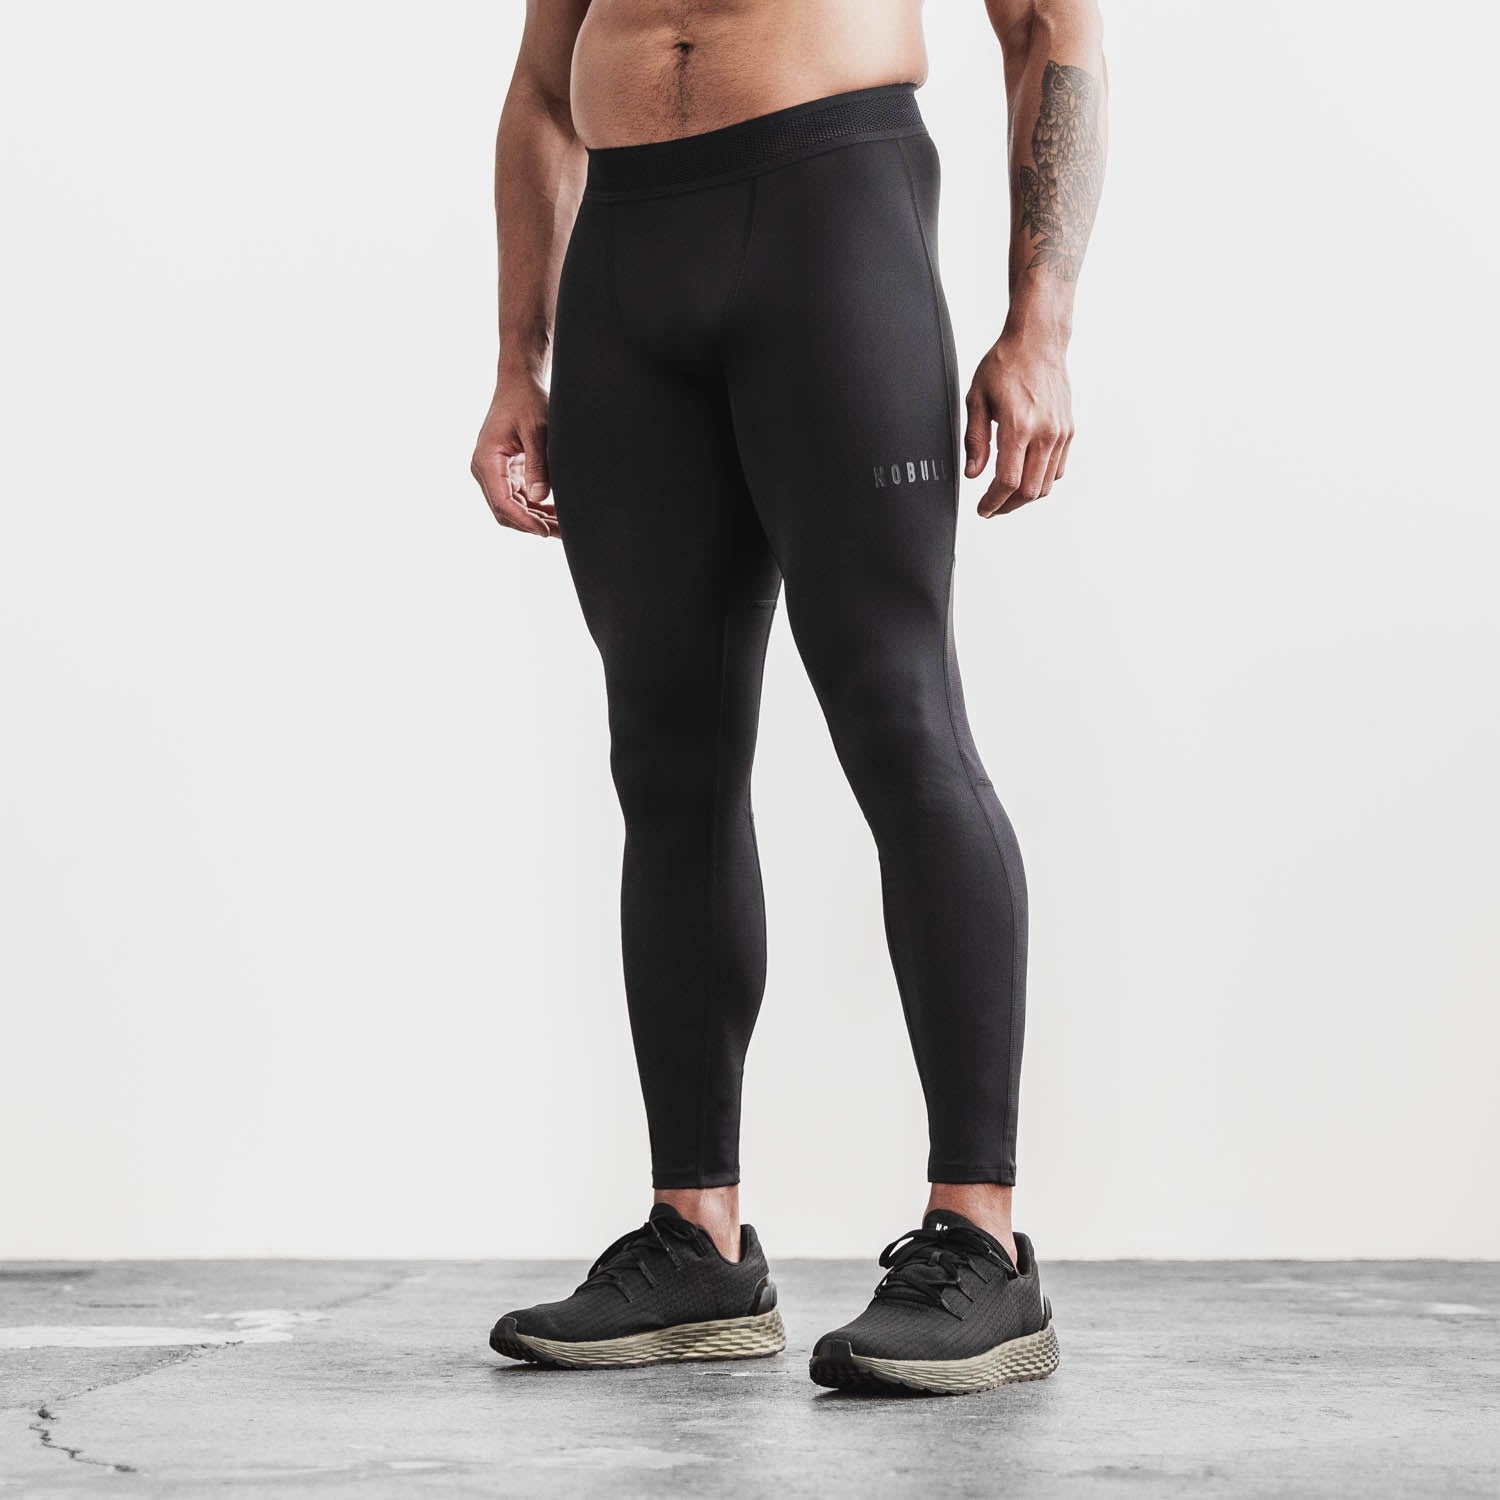 Men's Midweight Seamless Compression Short 9